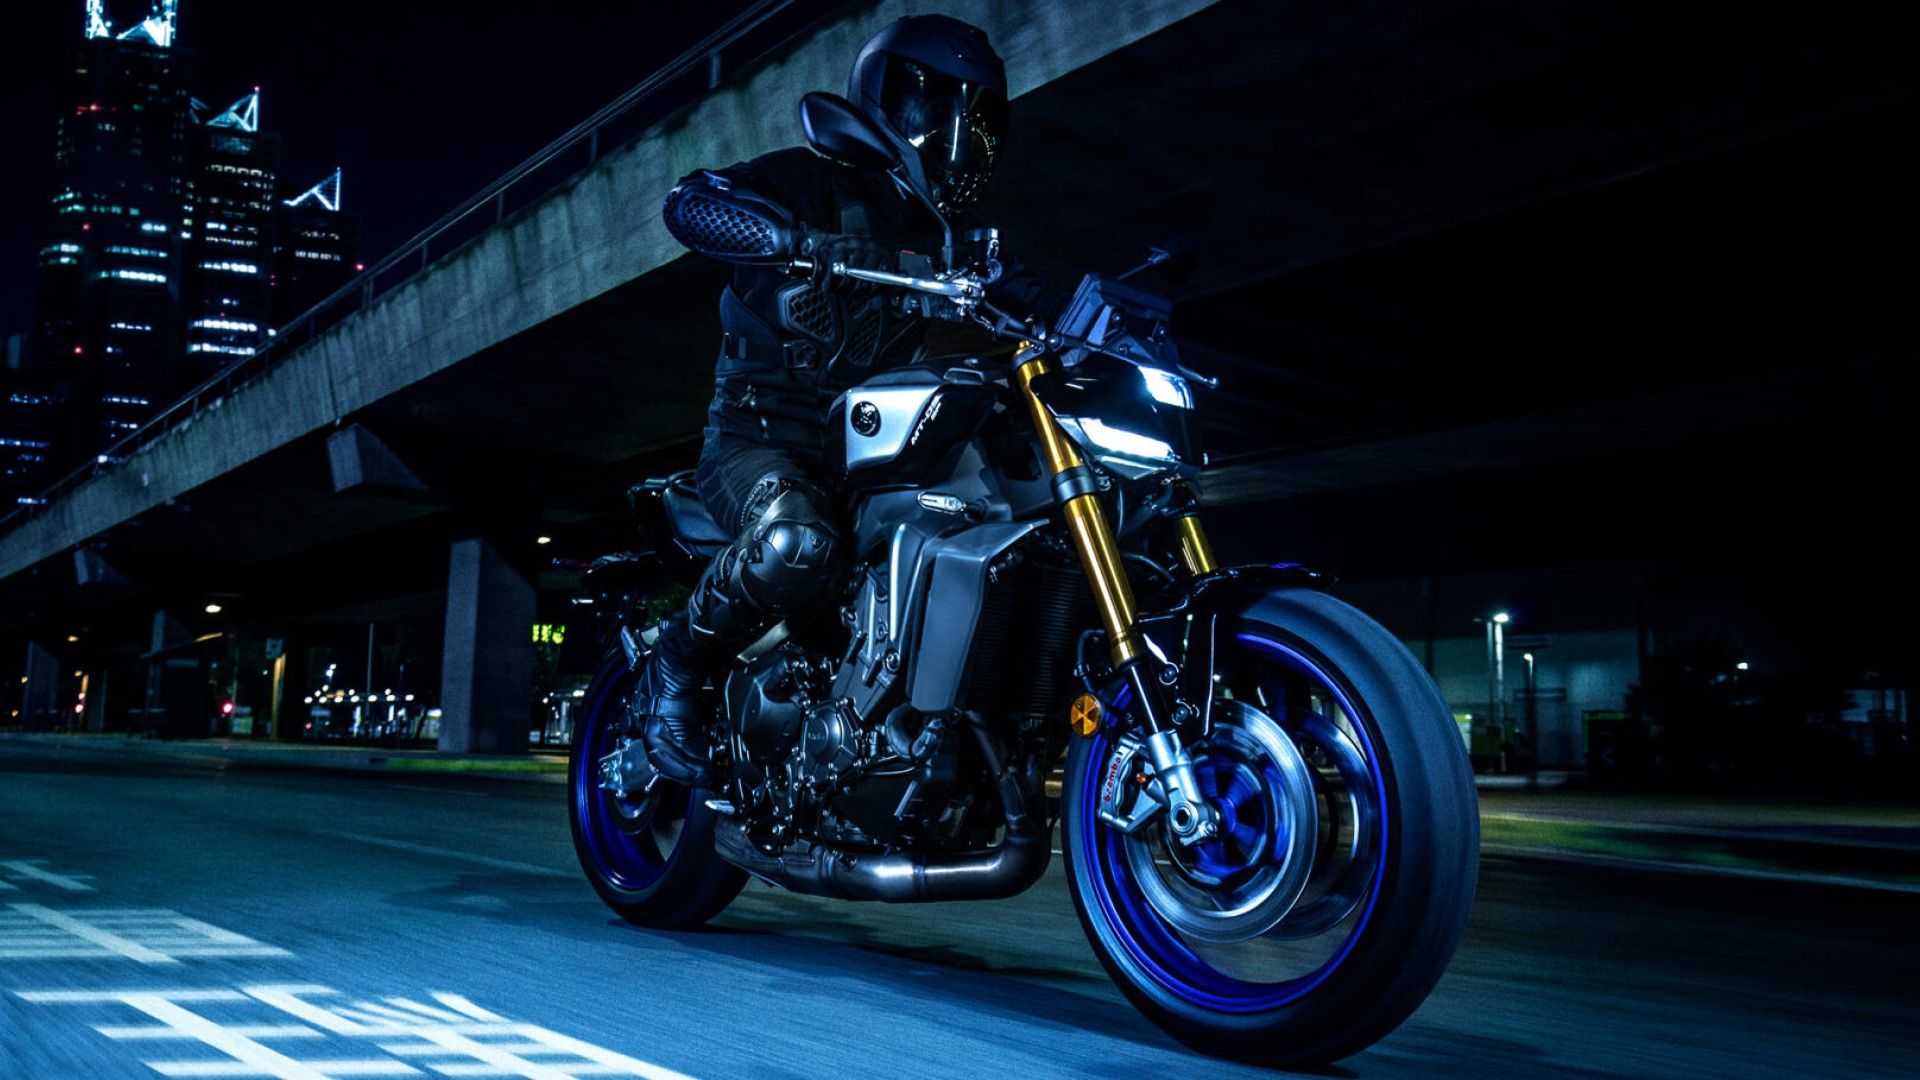 Superior Darkness: Yamaha Announces All-New MT-09 SP